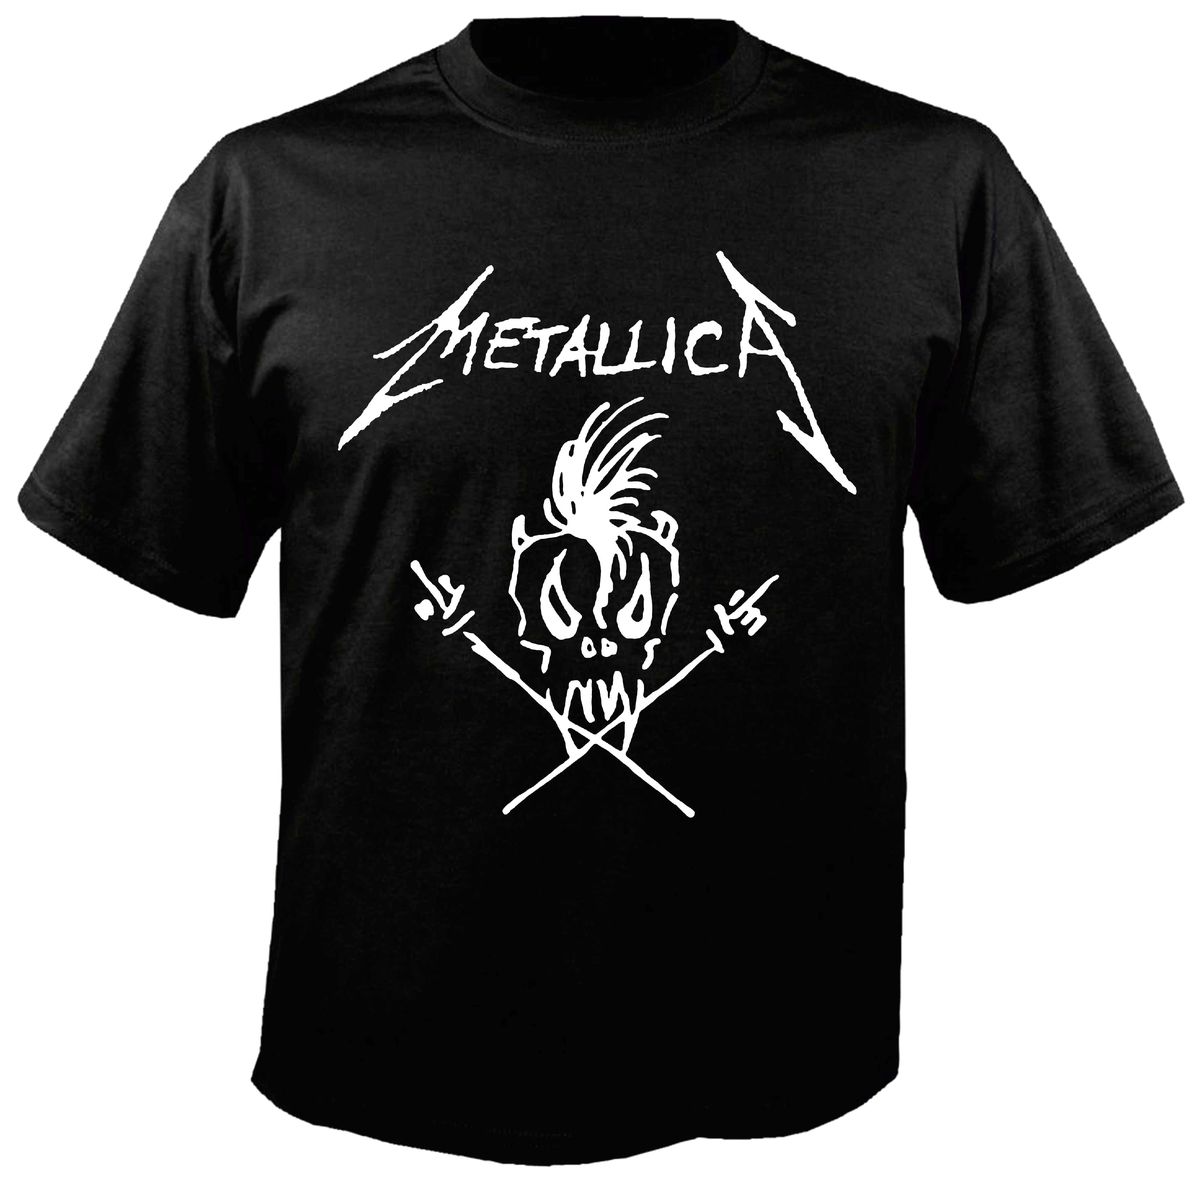 Metallica Band T-Shirt – Metal & Rock T-shirts and Accessories